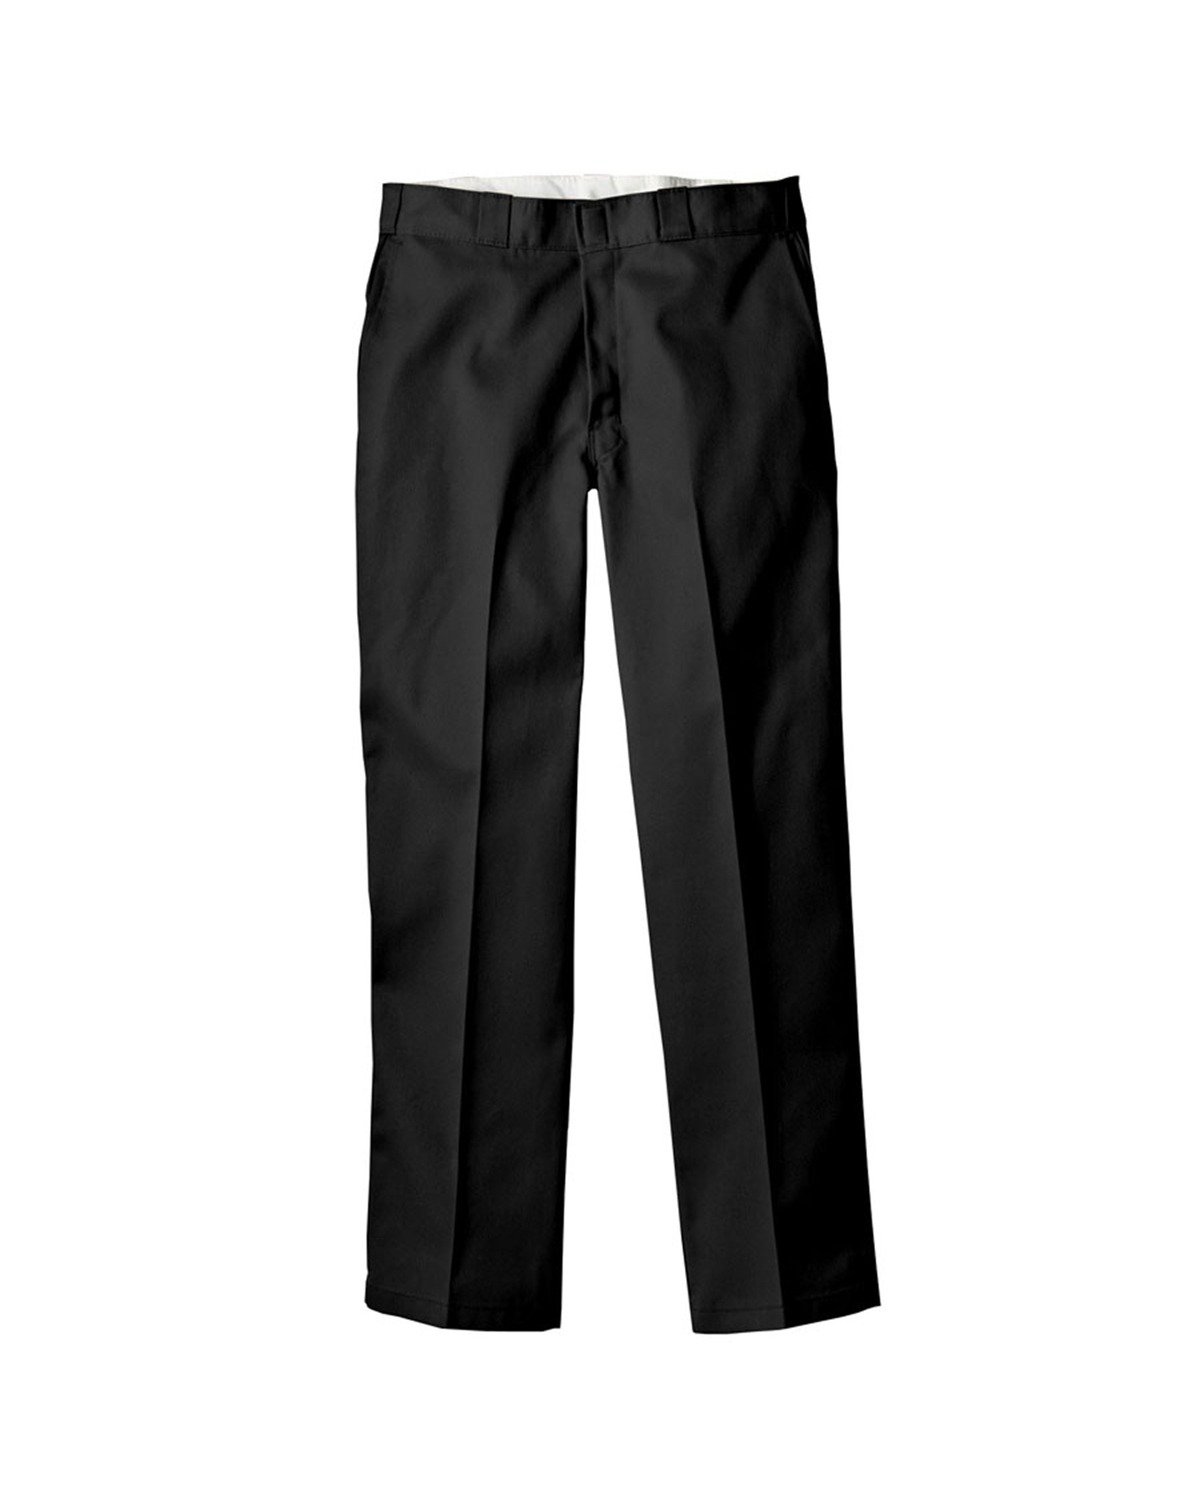 Front view of Men’s Twill Work Pant